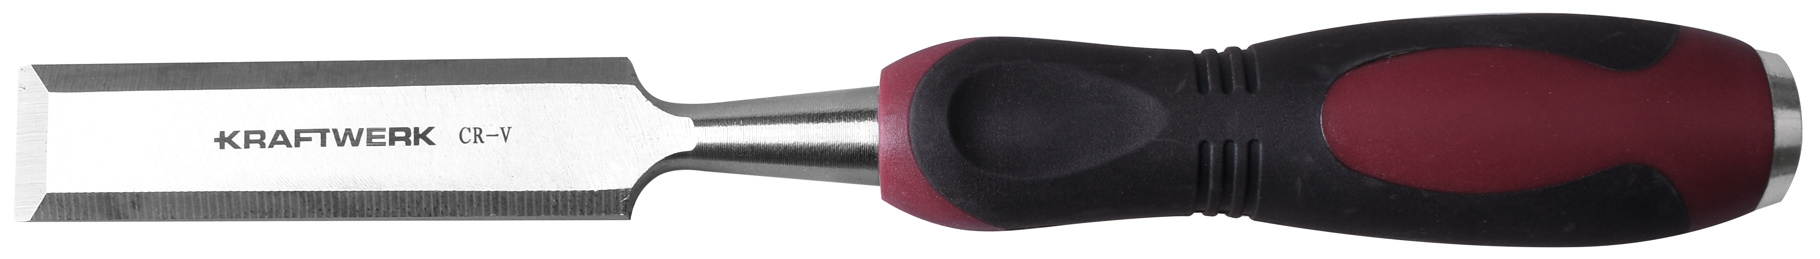 Wood chisel with strike cap, 32 mm